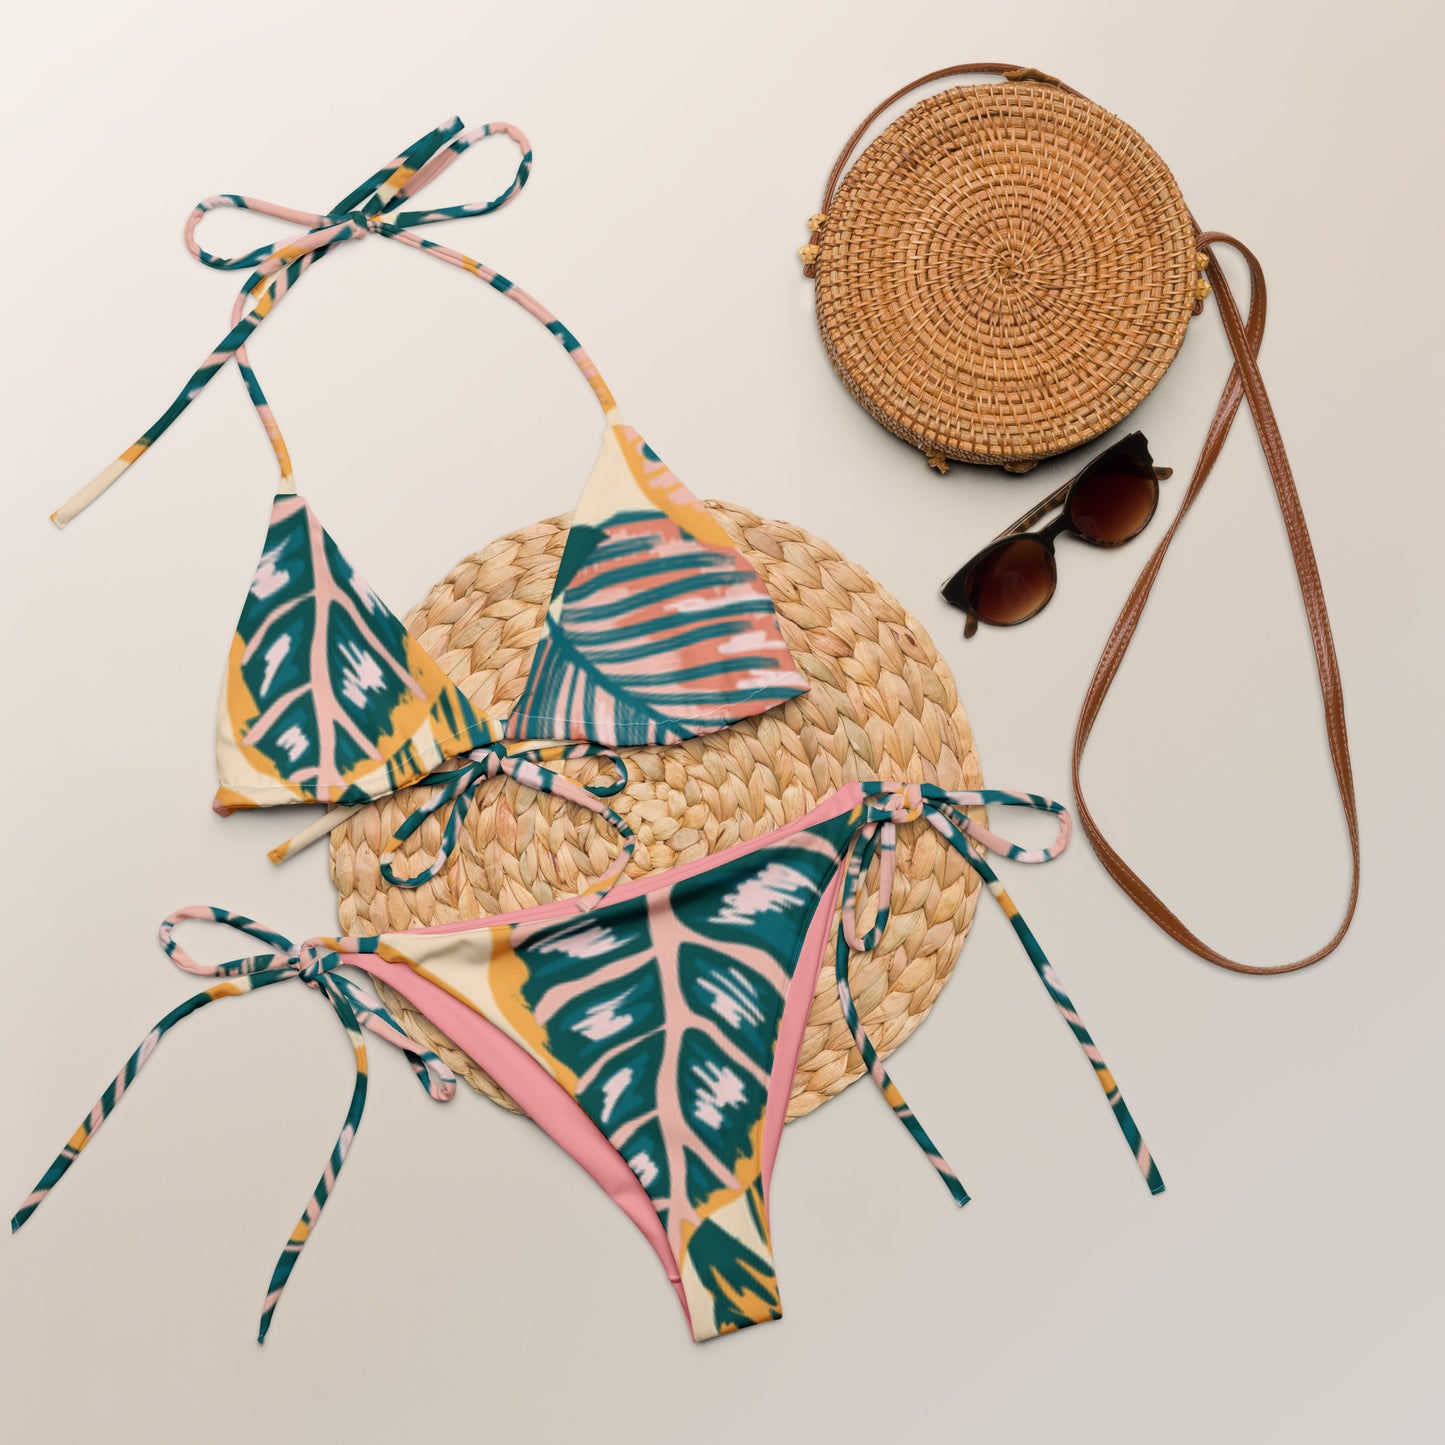 Palm Two Piece Swimsuit